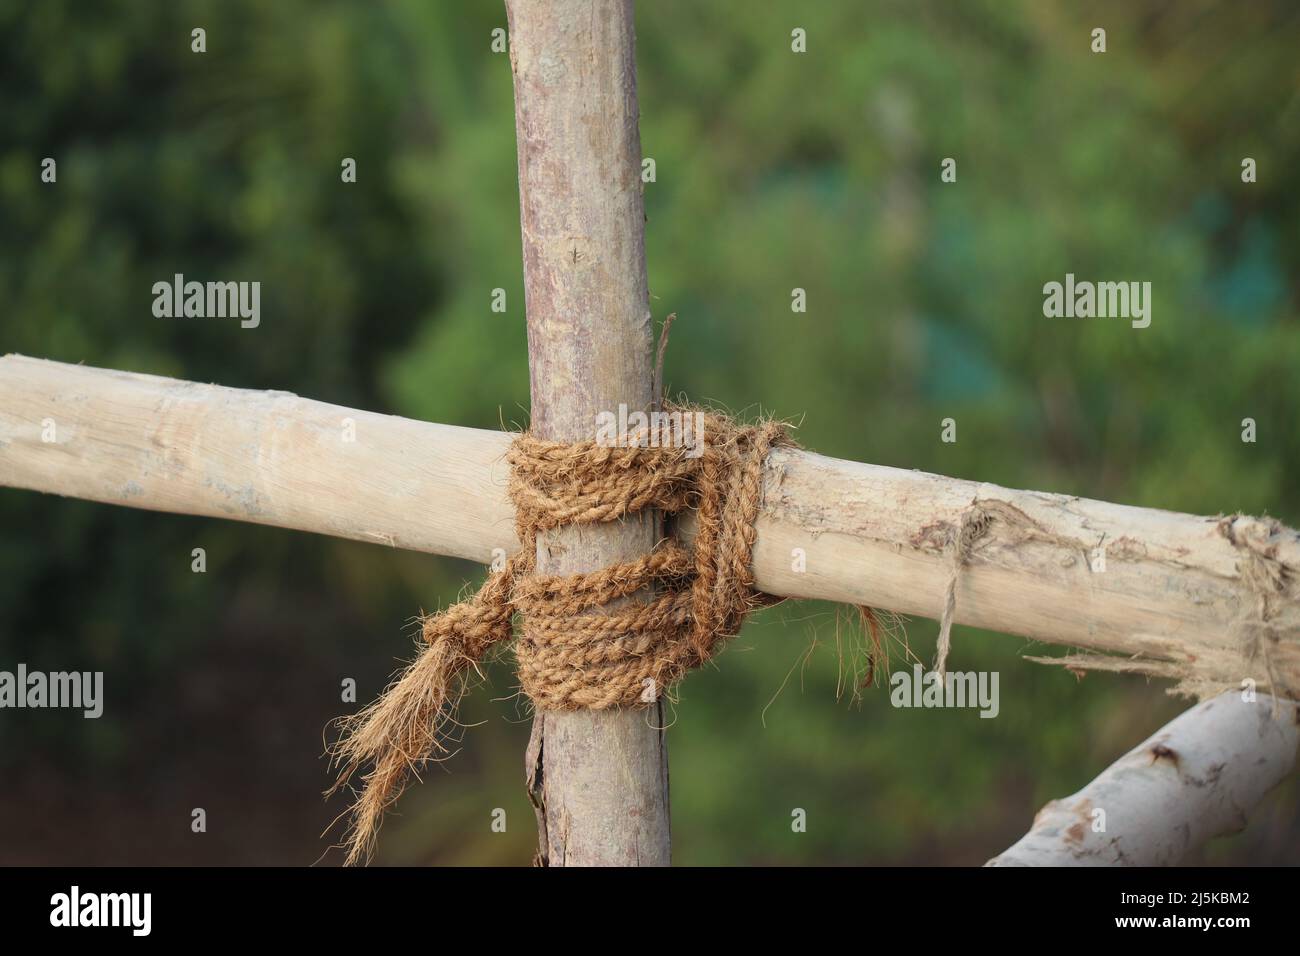 Wooden poles tied up with natural fiber ropes also called scaffolding in the construction term to temporarily support structures Stock Photo